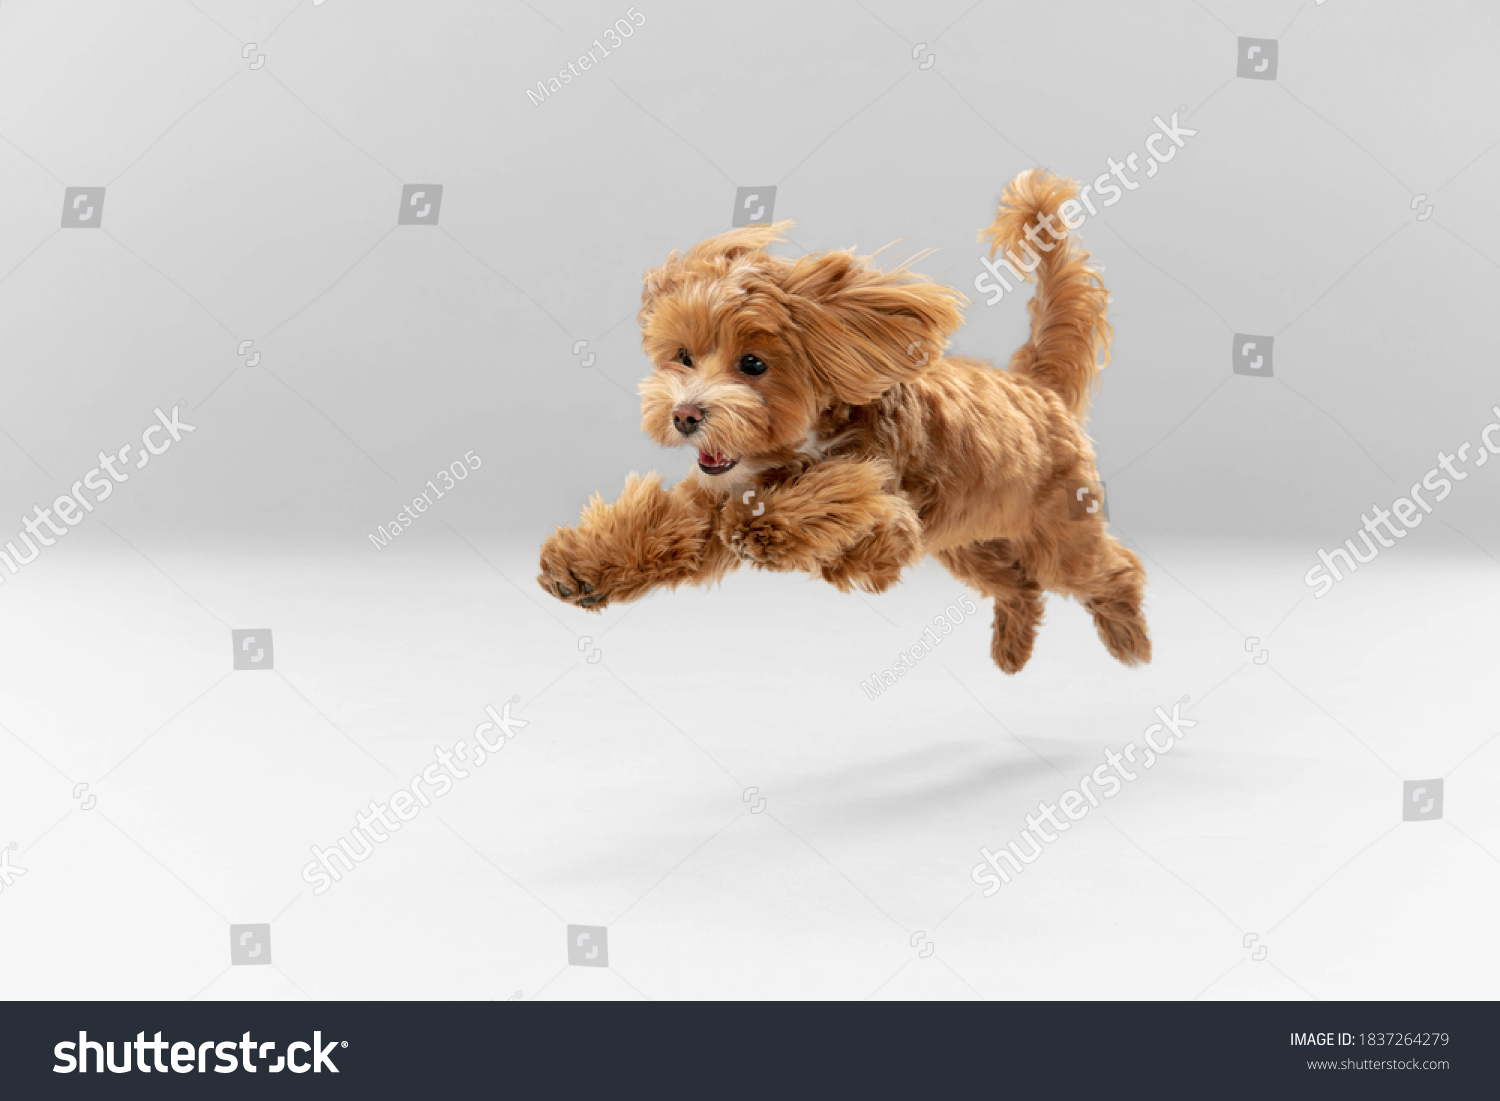 Sincere emotions. Maltipu little dog is posing. Cute playful braun doggy or pet playing on white studio background. Concept of motion, action, movement, pets love. Looks happy, delighted, funny. #1837264279